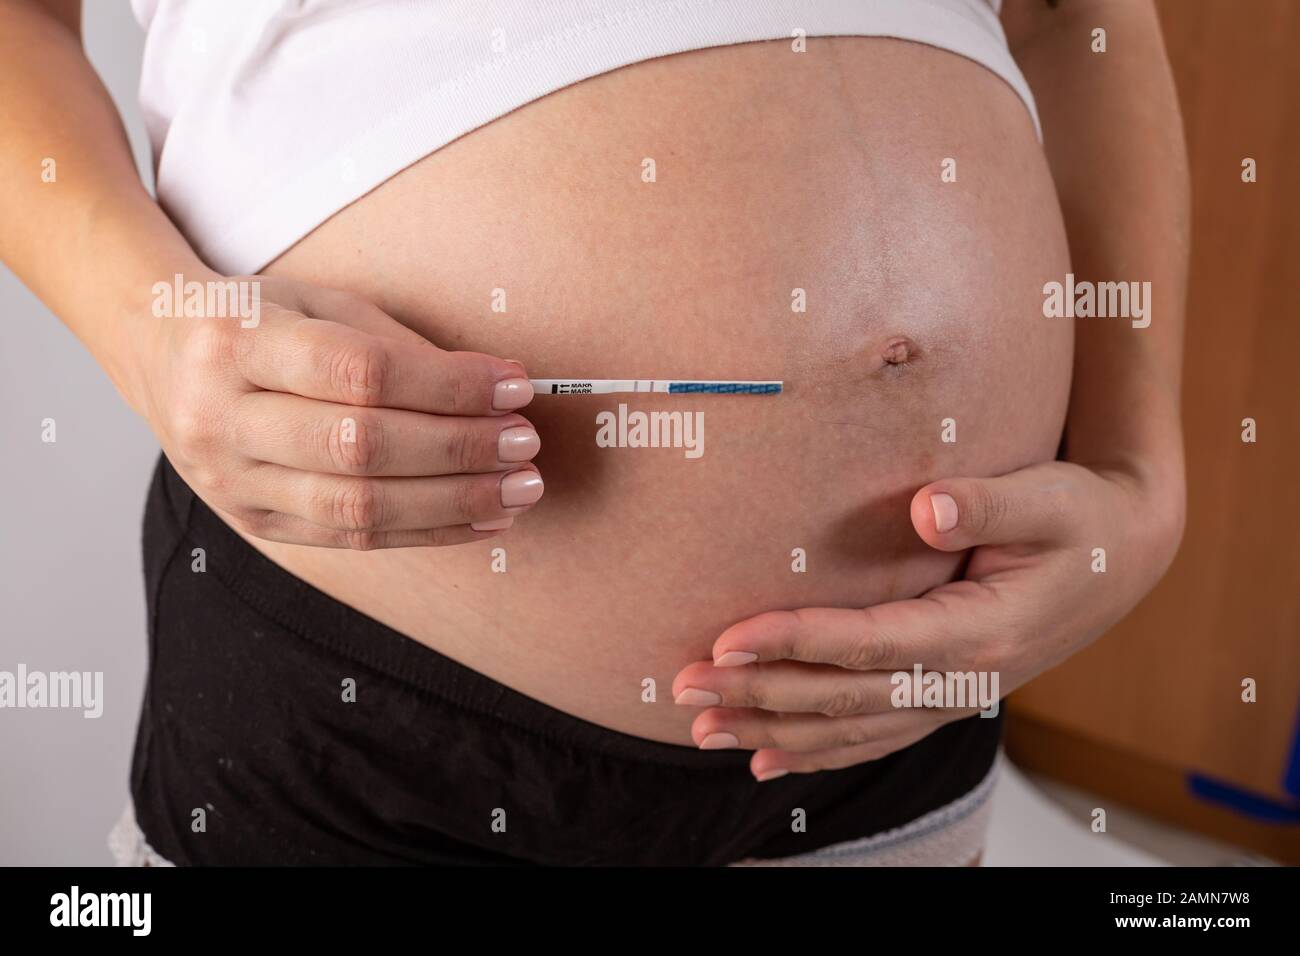 positive pregnancy test in woman hands close up Stock Photo